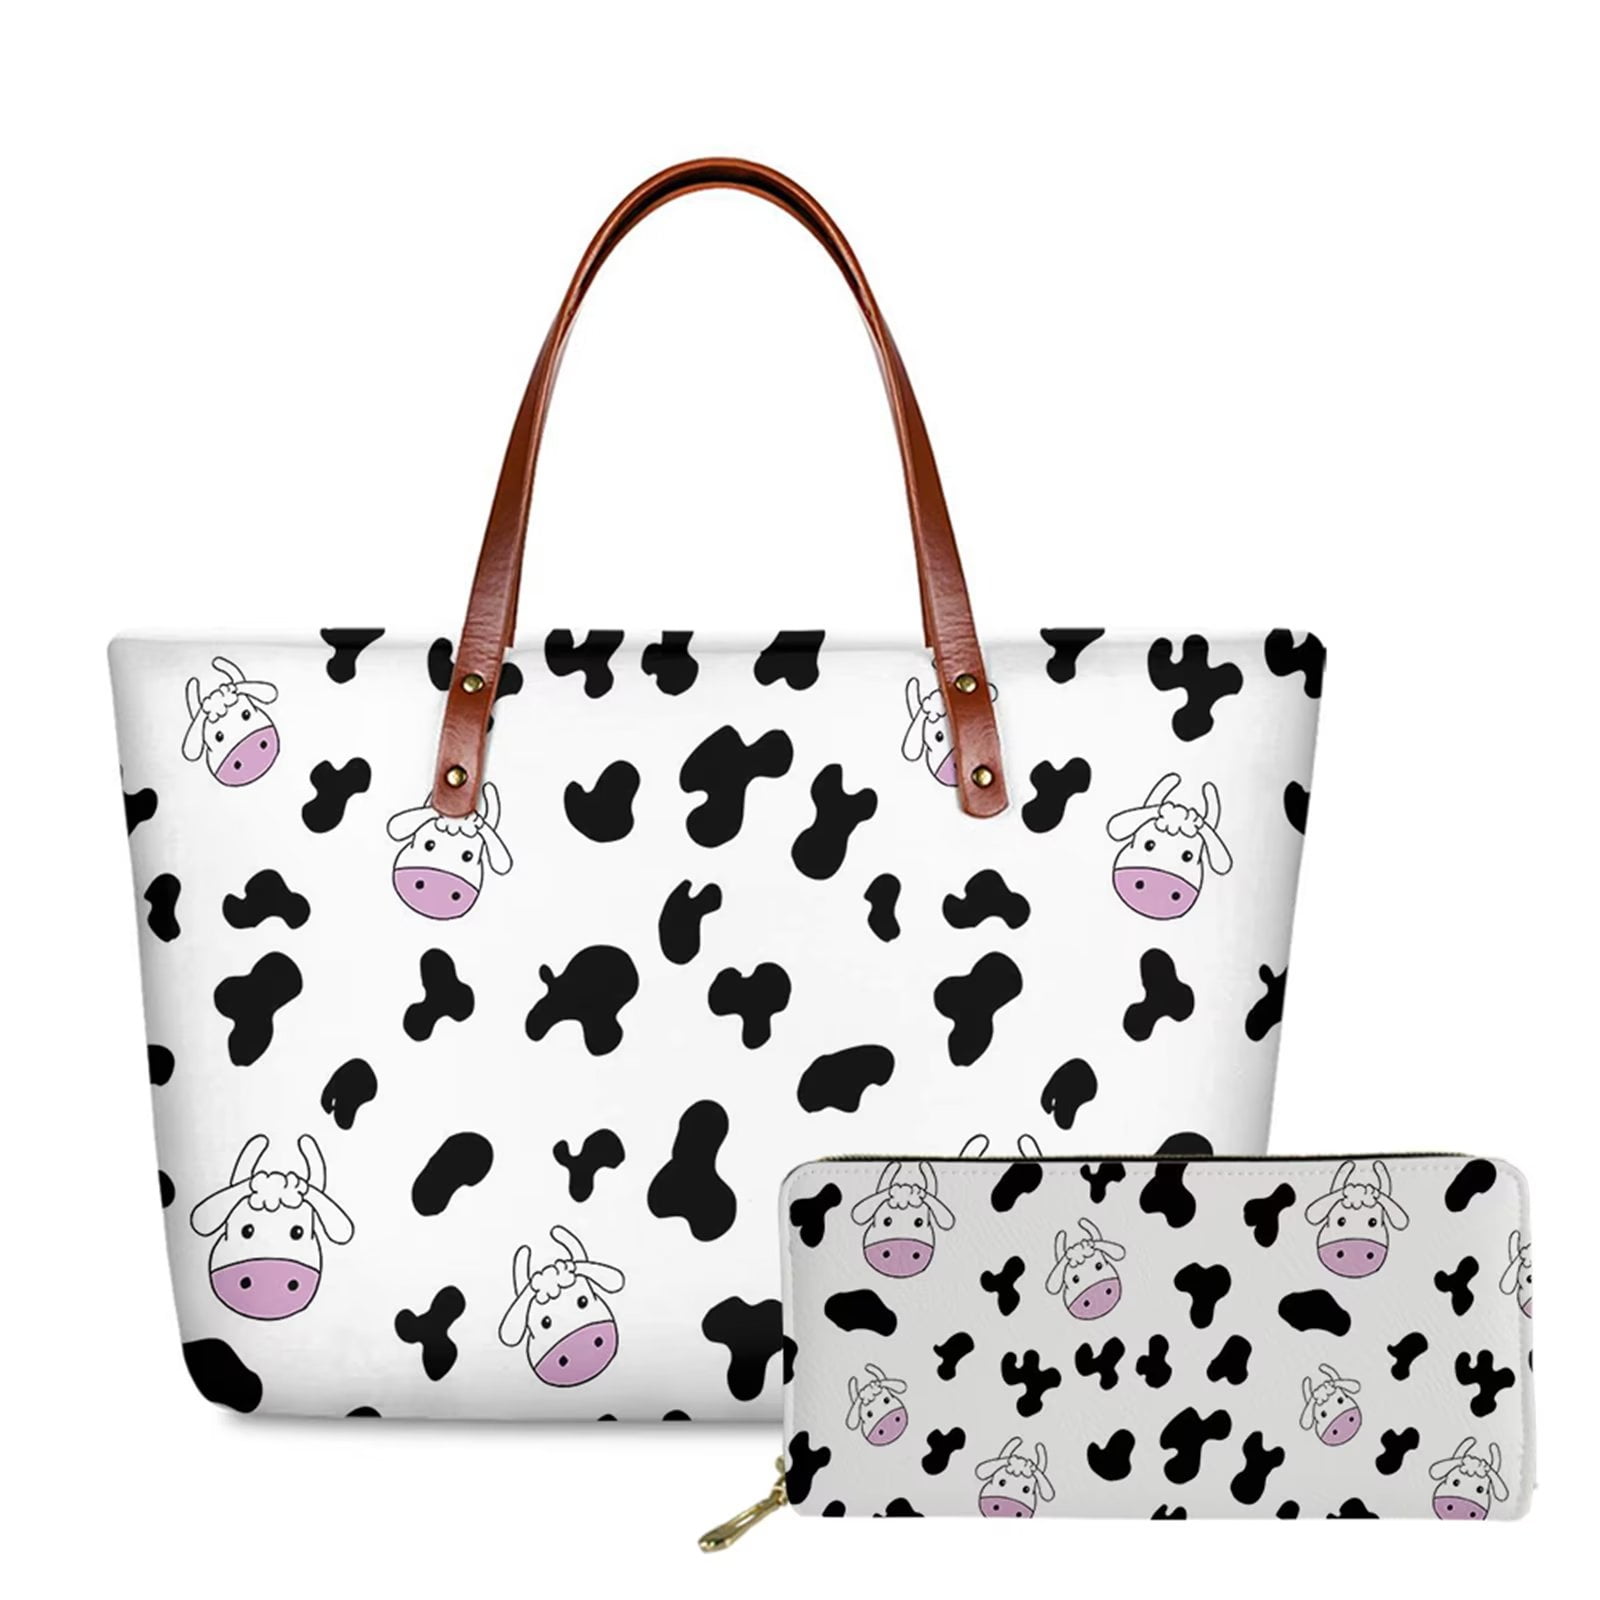 FKELYI 2 Pcs Pink Cow Print Tote Handbags with Zipper for Women